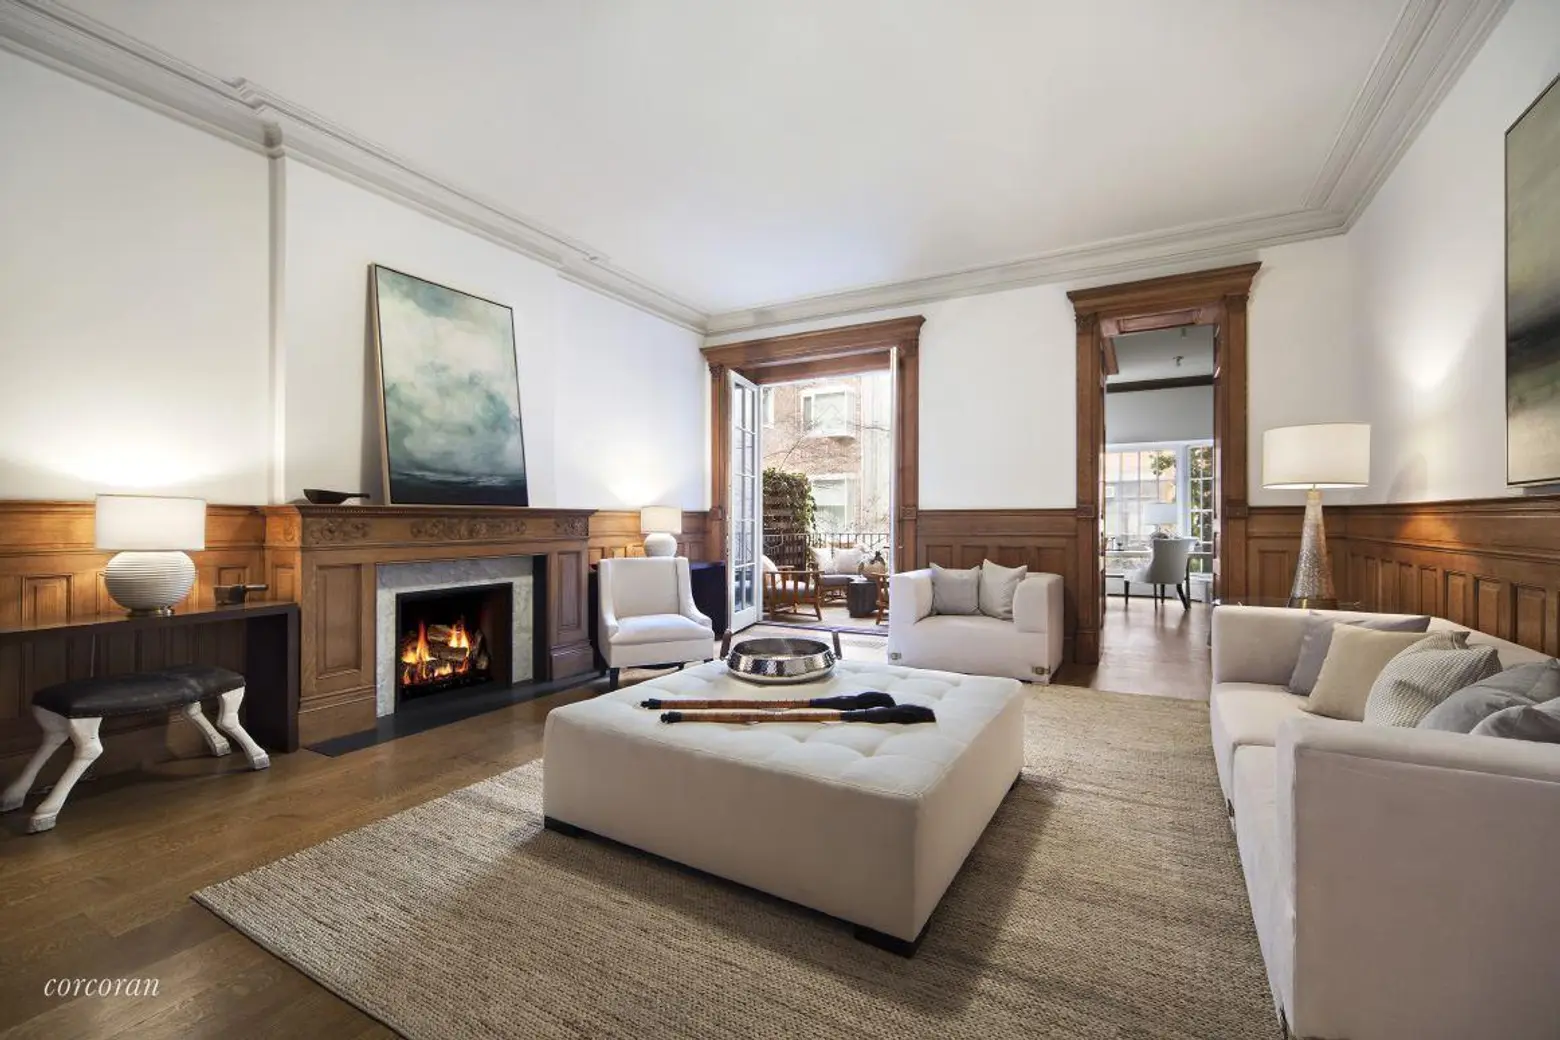 Producer Bob Weinstein makes no profit on $15M Upper West Side townhouse sale